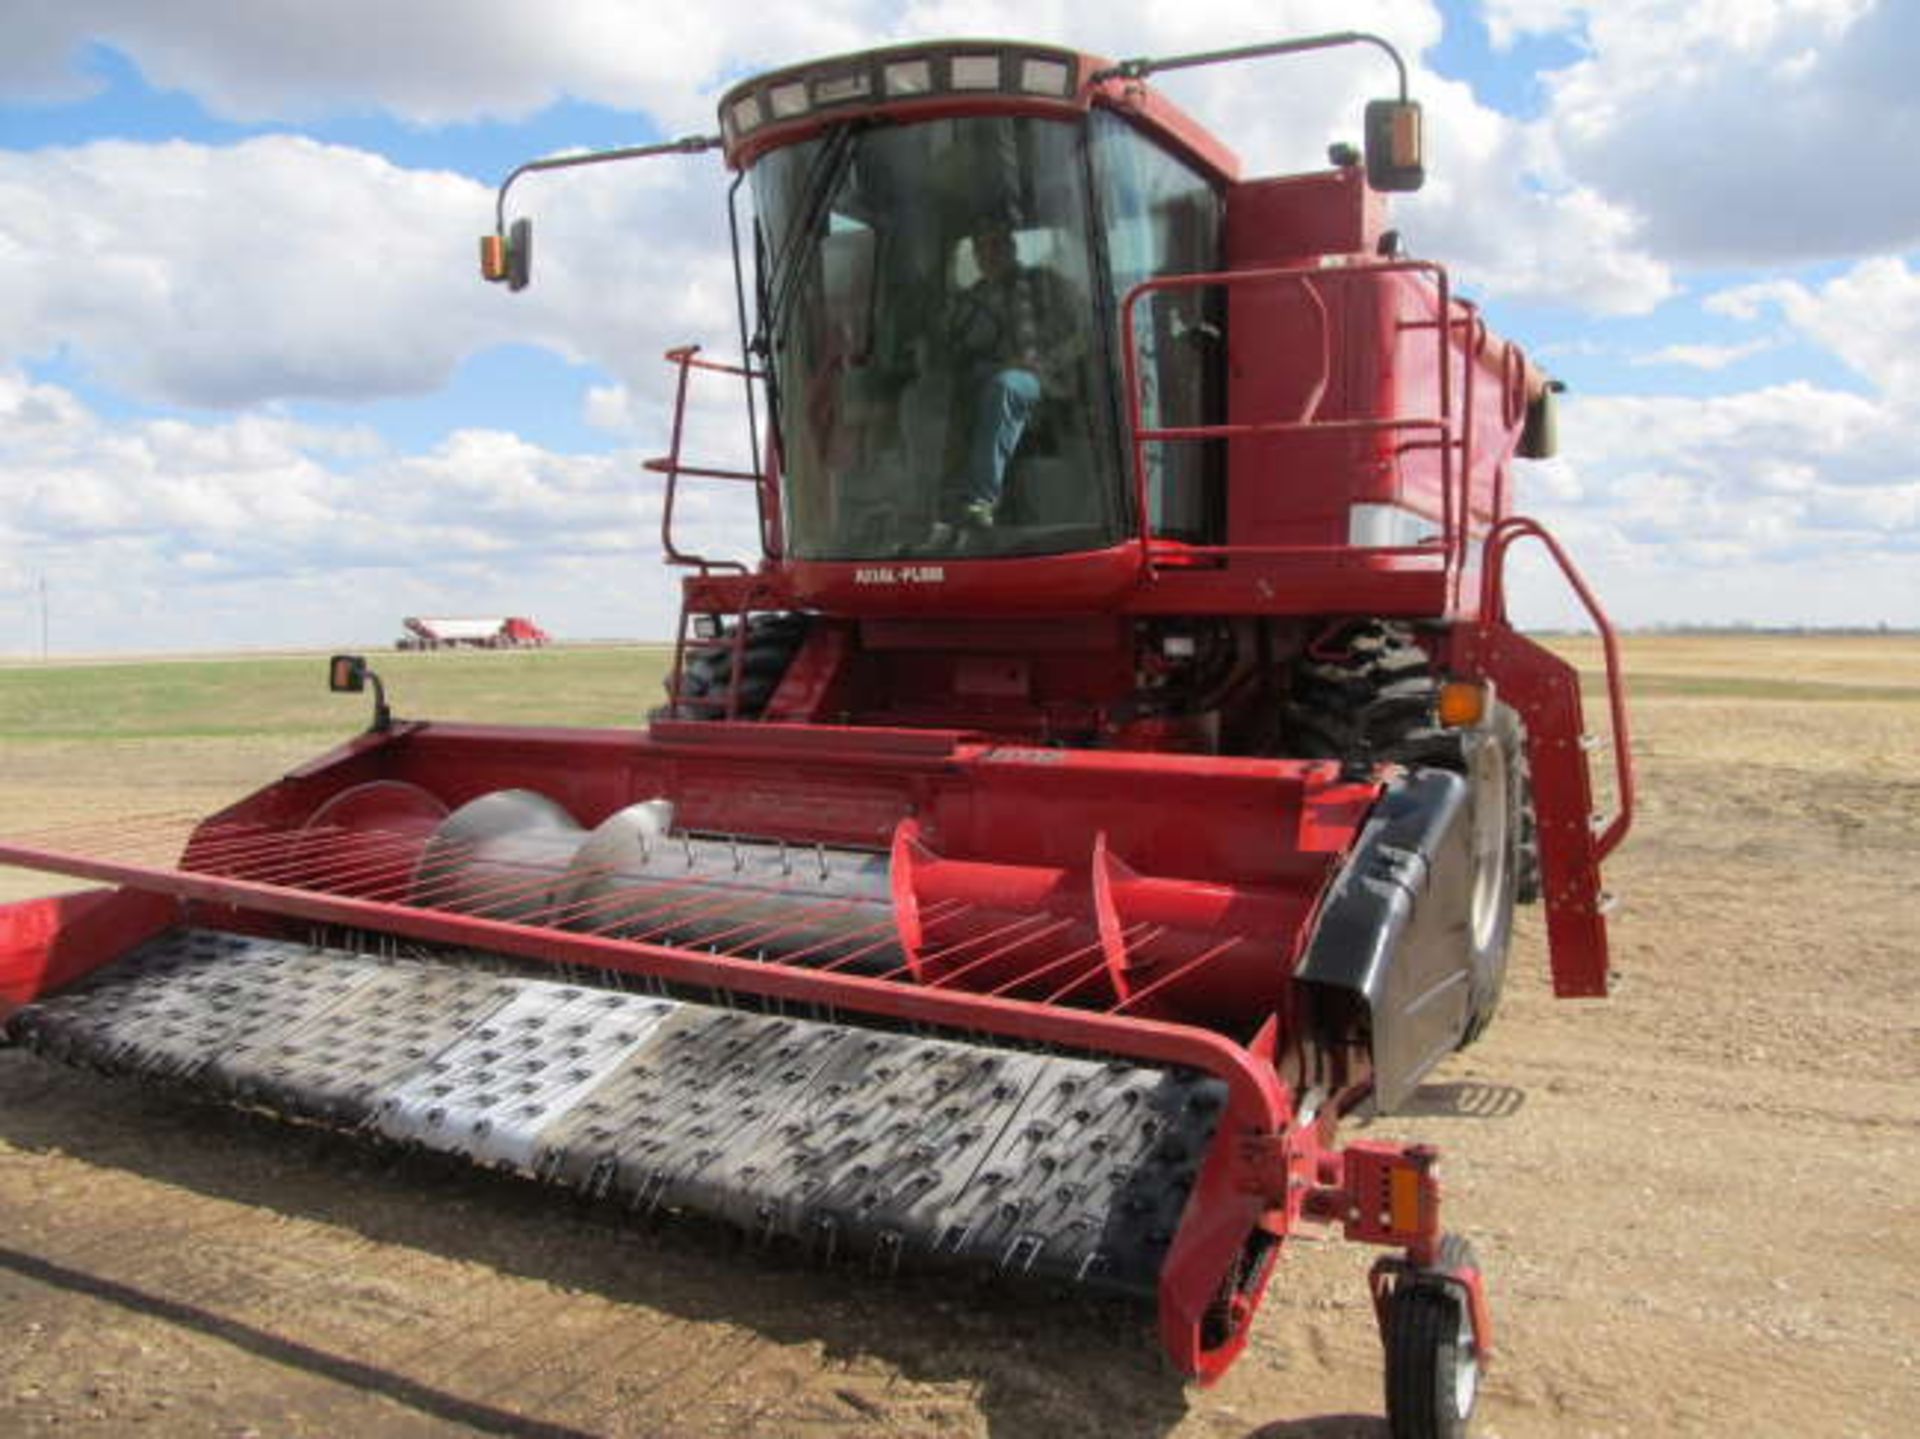 CASE IH 2366 AXIAL FLOW SP COMBINE; 987/1286 Rotor/Engine Hours, Case IH 1015 Pick-up Header, SN- - Image 2 of 5